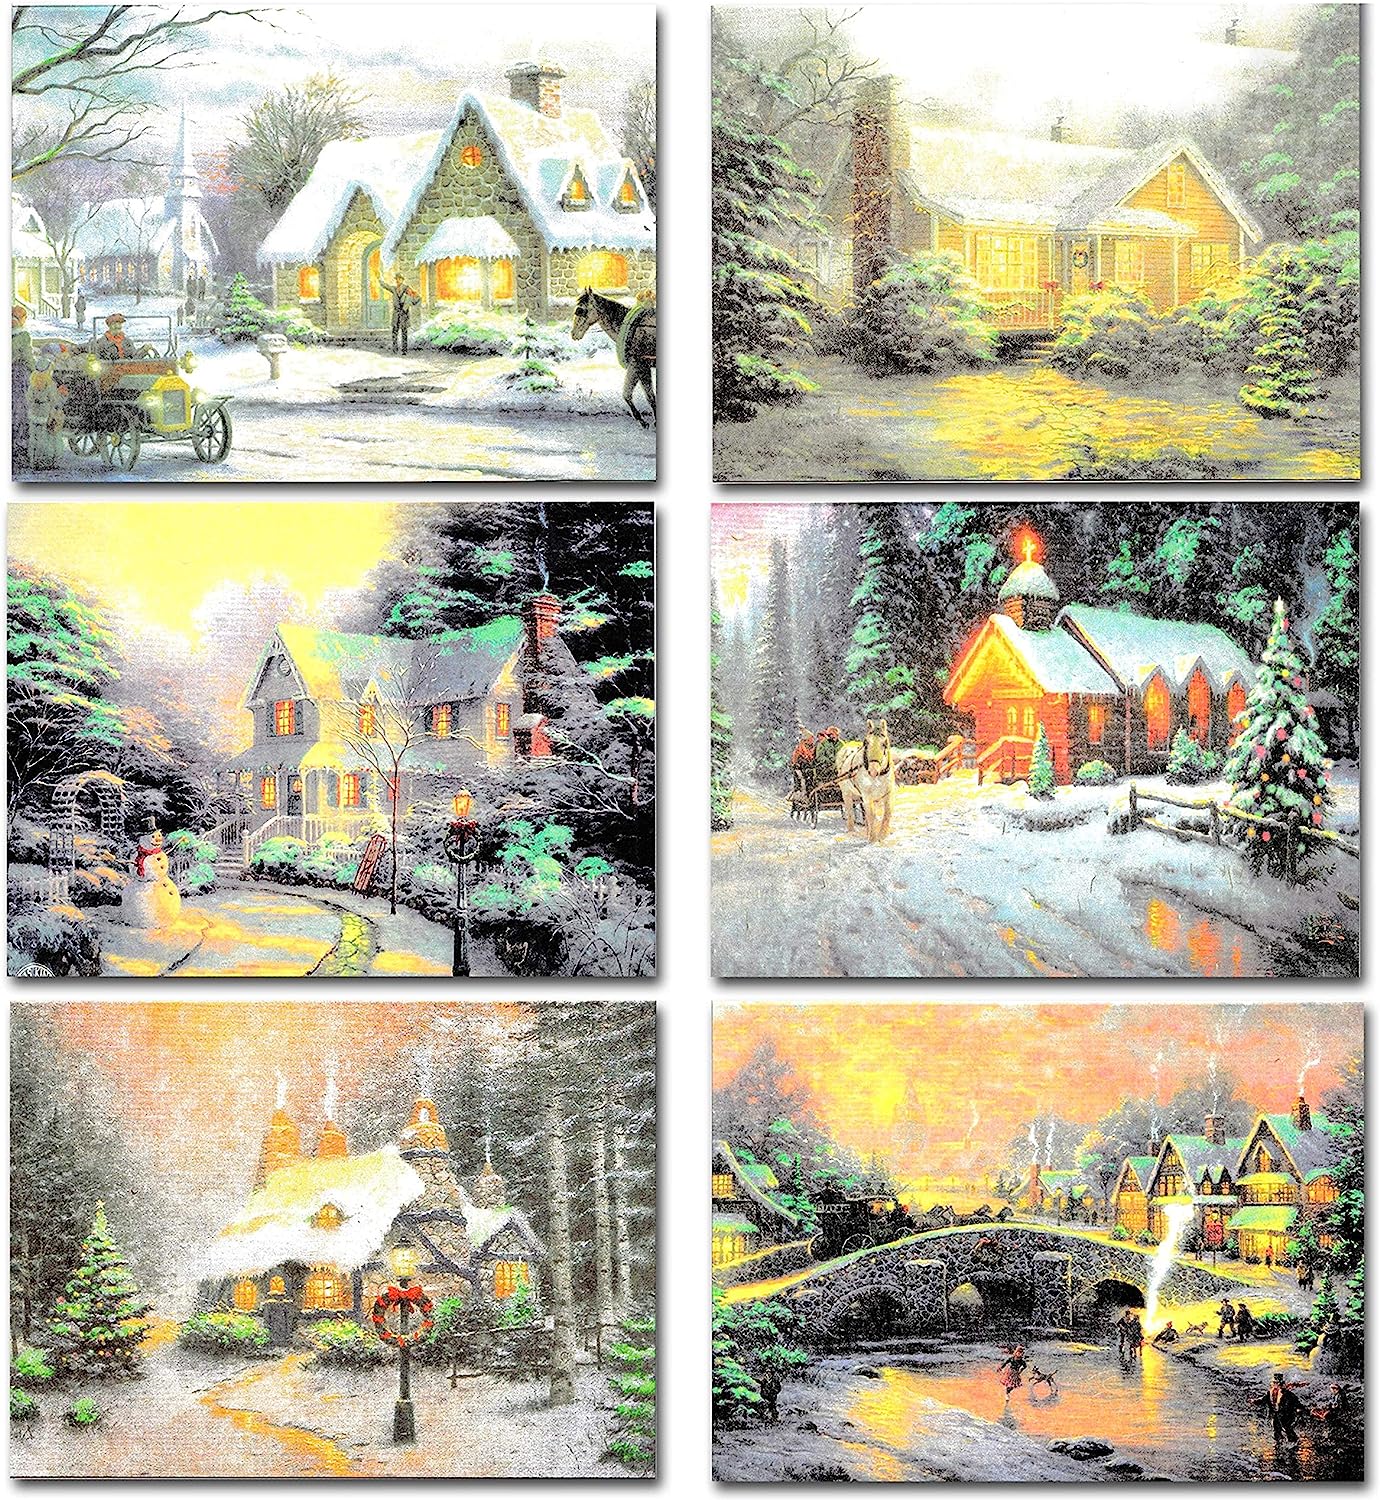 Joyin 72 Snowy Town Christmas Greeting Cards with Envelopes RRP £8.99 CLEARANCE XL £6.99